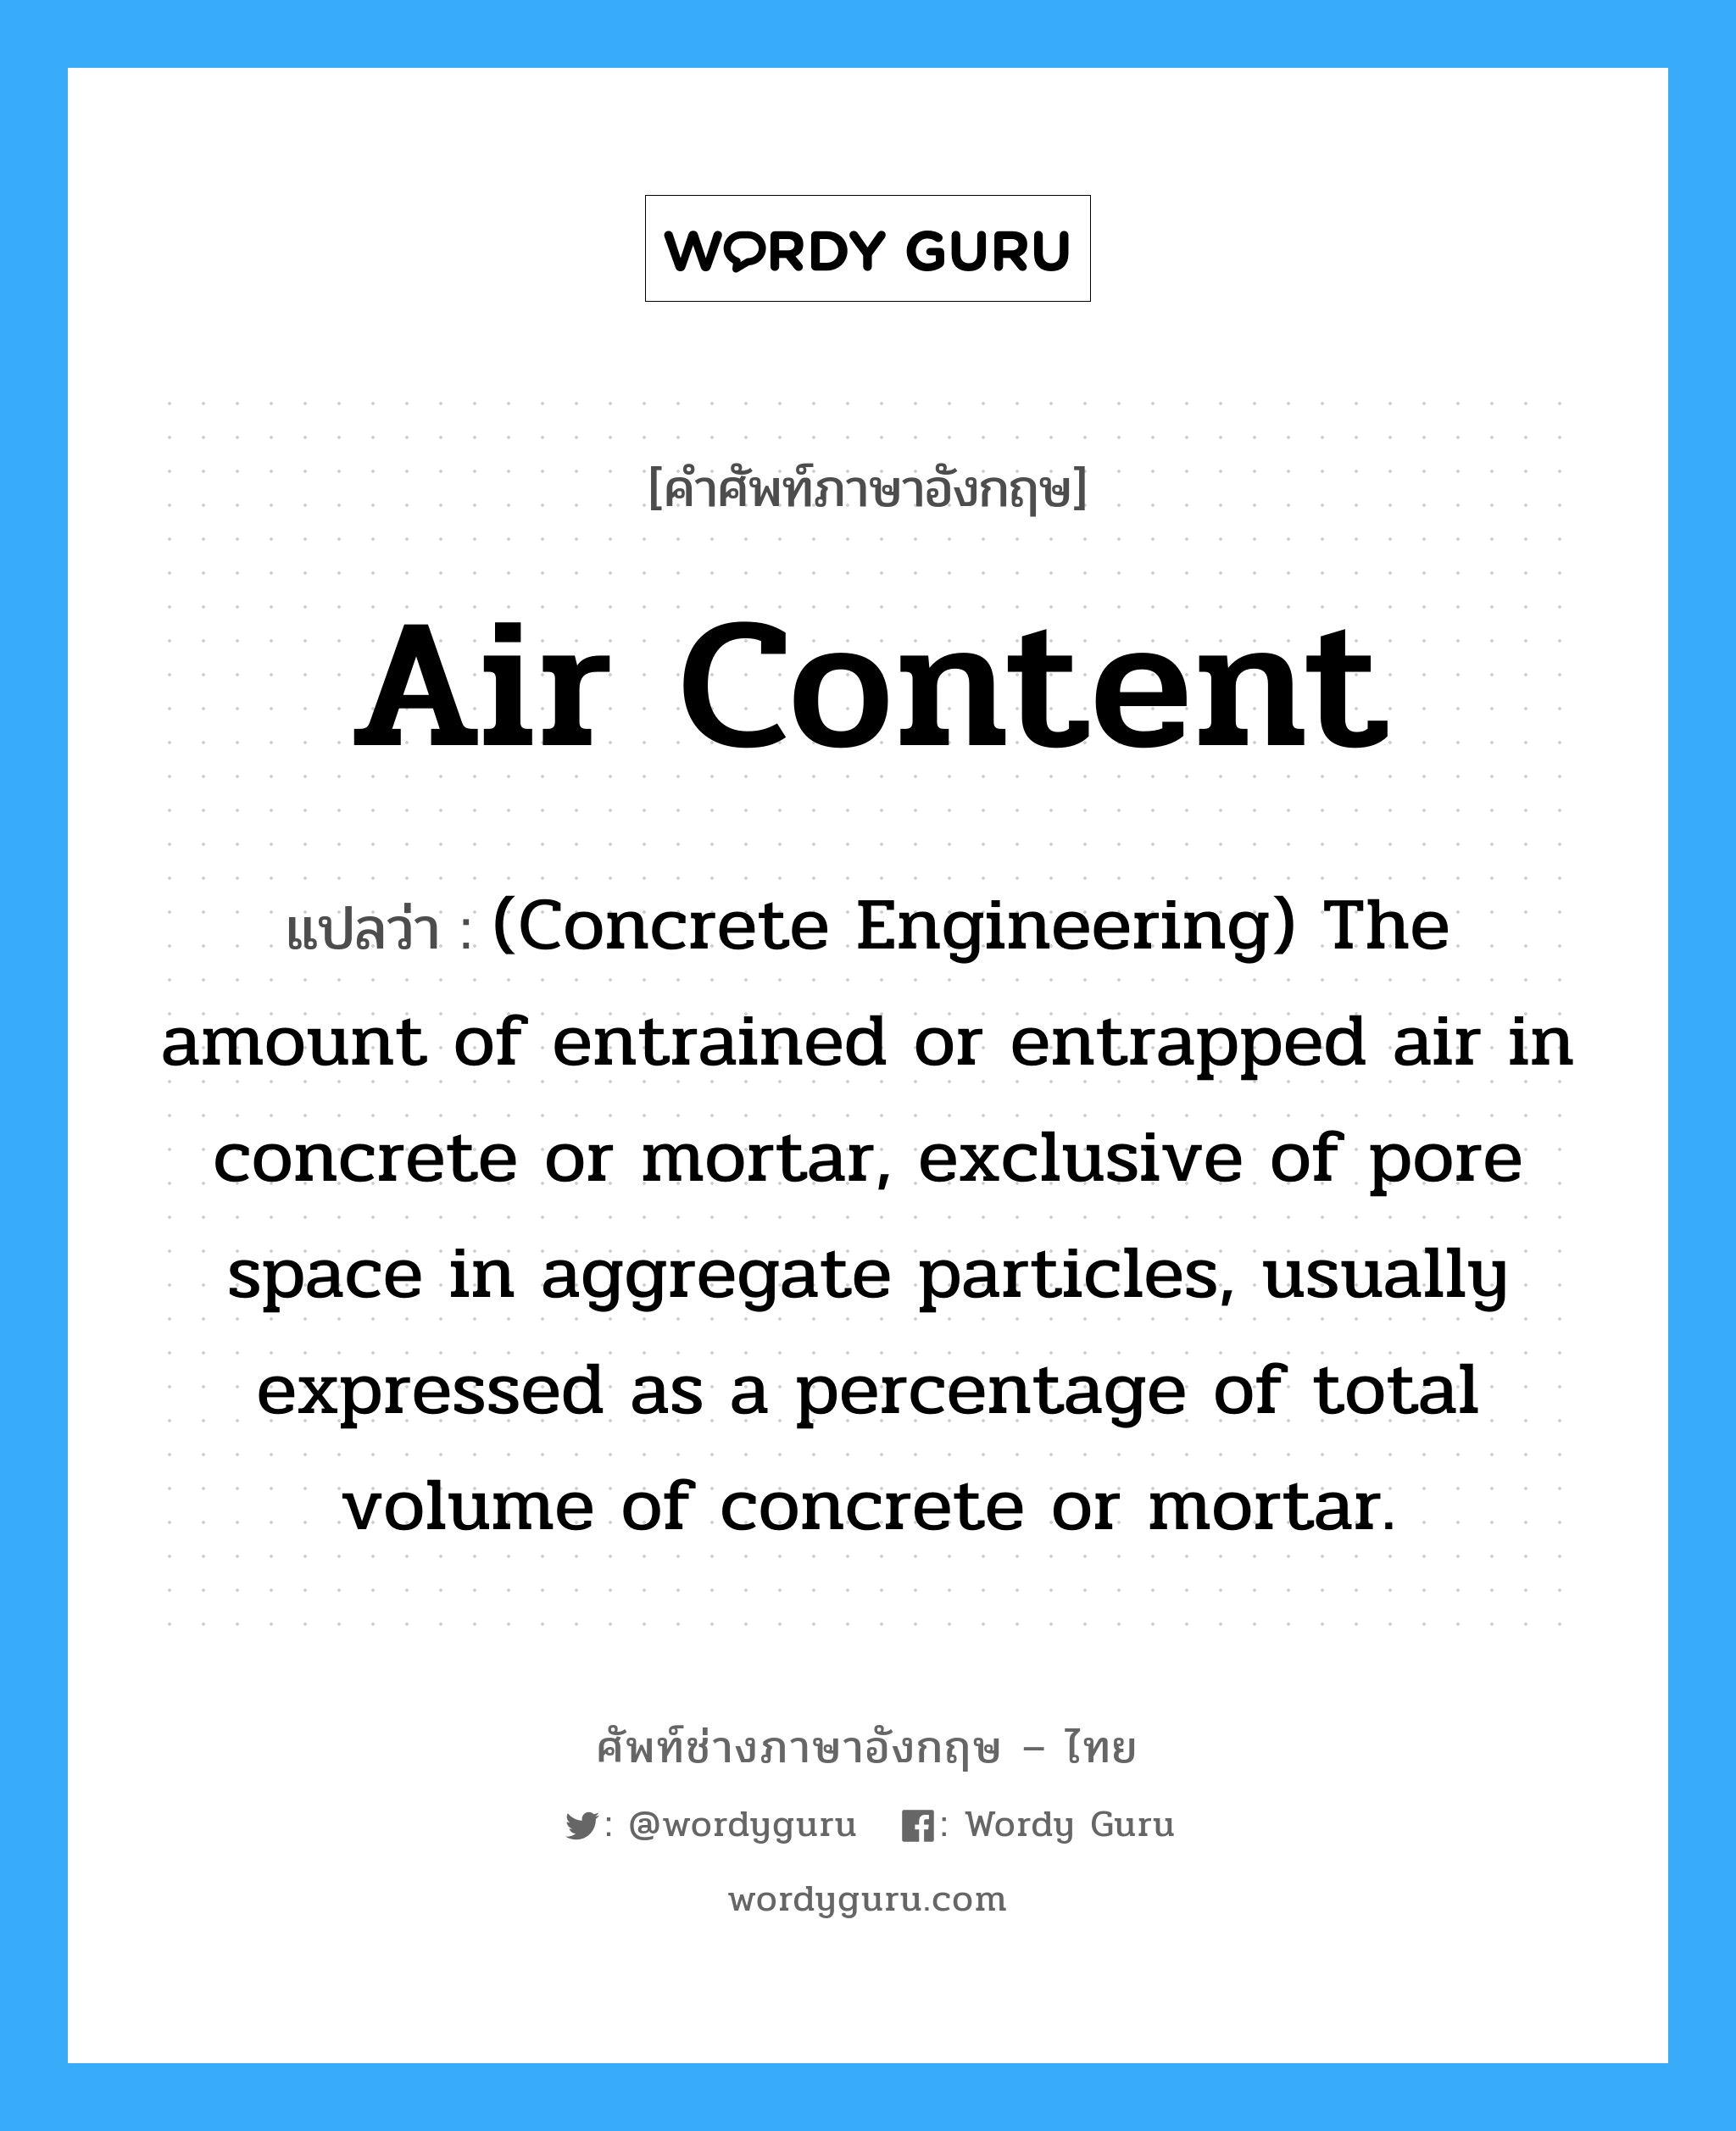 Air Content แปลว่า?, คำศัพท์ช่างภาษาอังกฤษ - ไทย Air Content คำศัพท์ภาษาอังกฤษ Air Content แปลว่า (Concrete Engineering) The amount of entrained or entrapped air in concrete or mortar, exclusive of pore space in aggregate particles, usually expressed as a percentage of total volume of concrete or mortar.